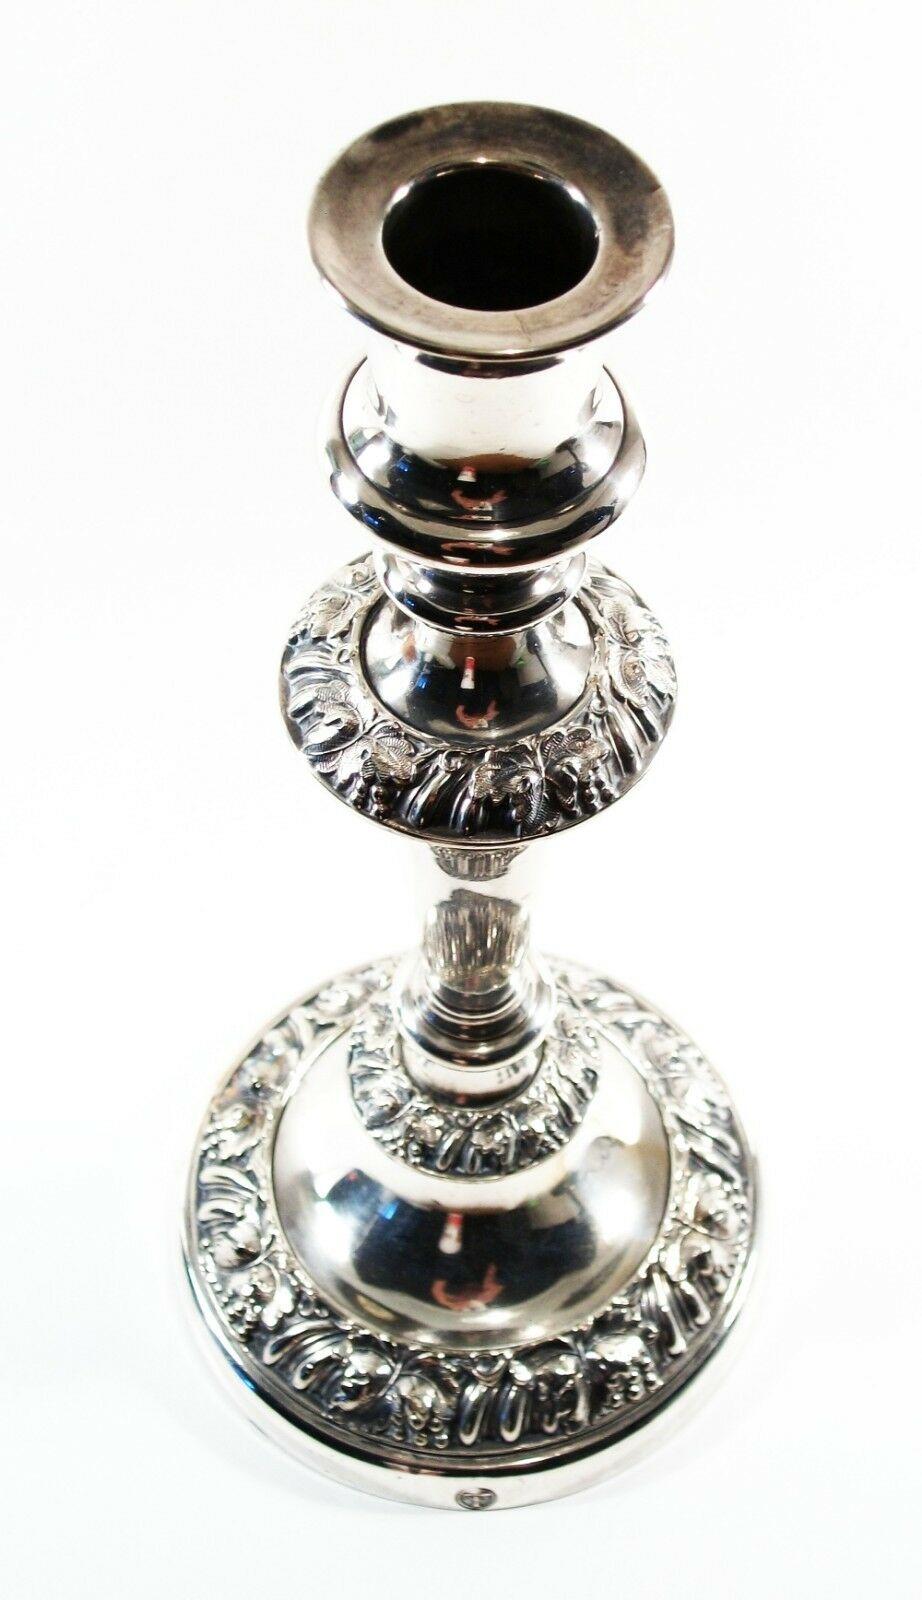 Ellis Barker, Antique Silver Plate Candlestick, England, Early 20th Century For Sale 3